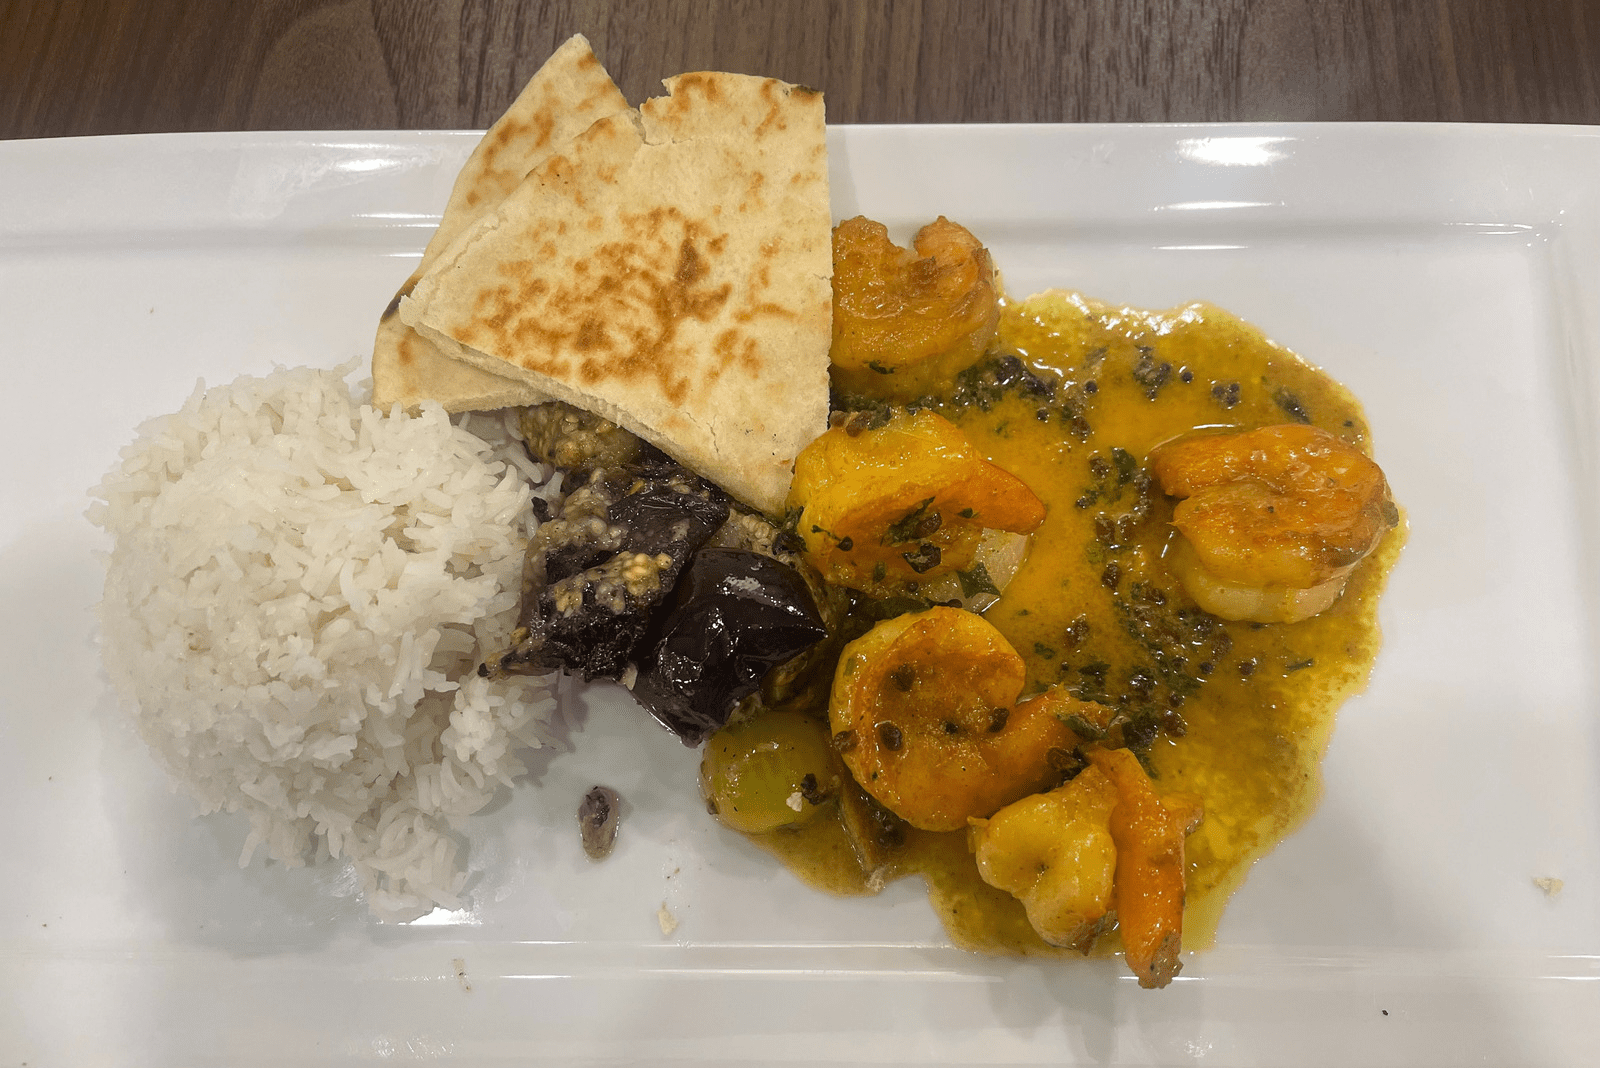 A plate of food with rice and shrimp.